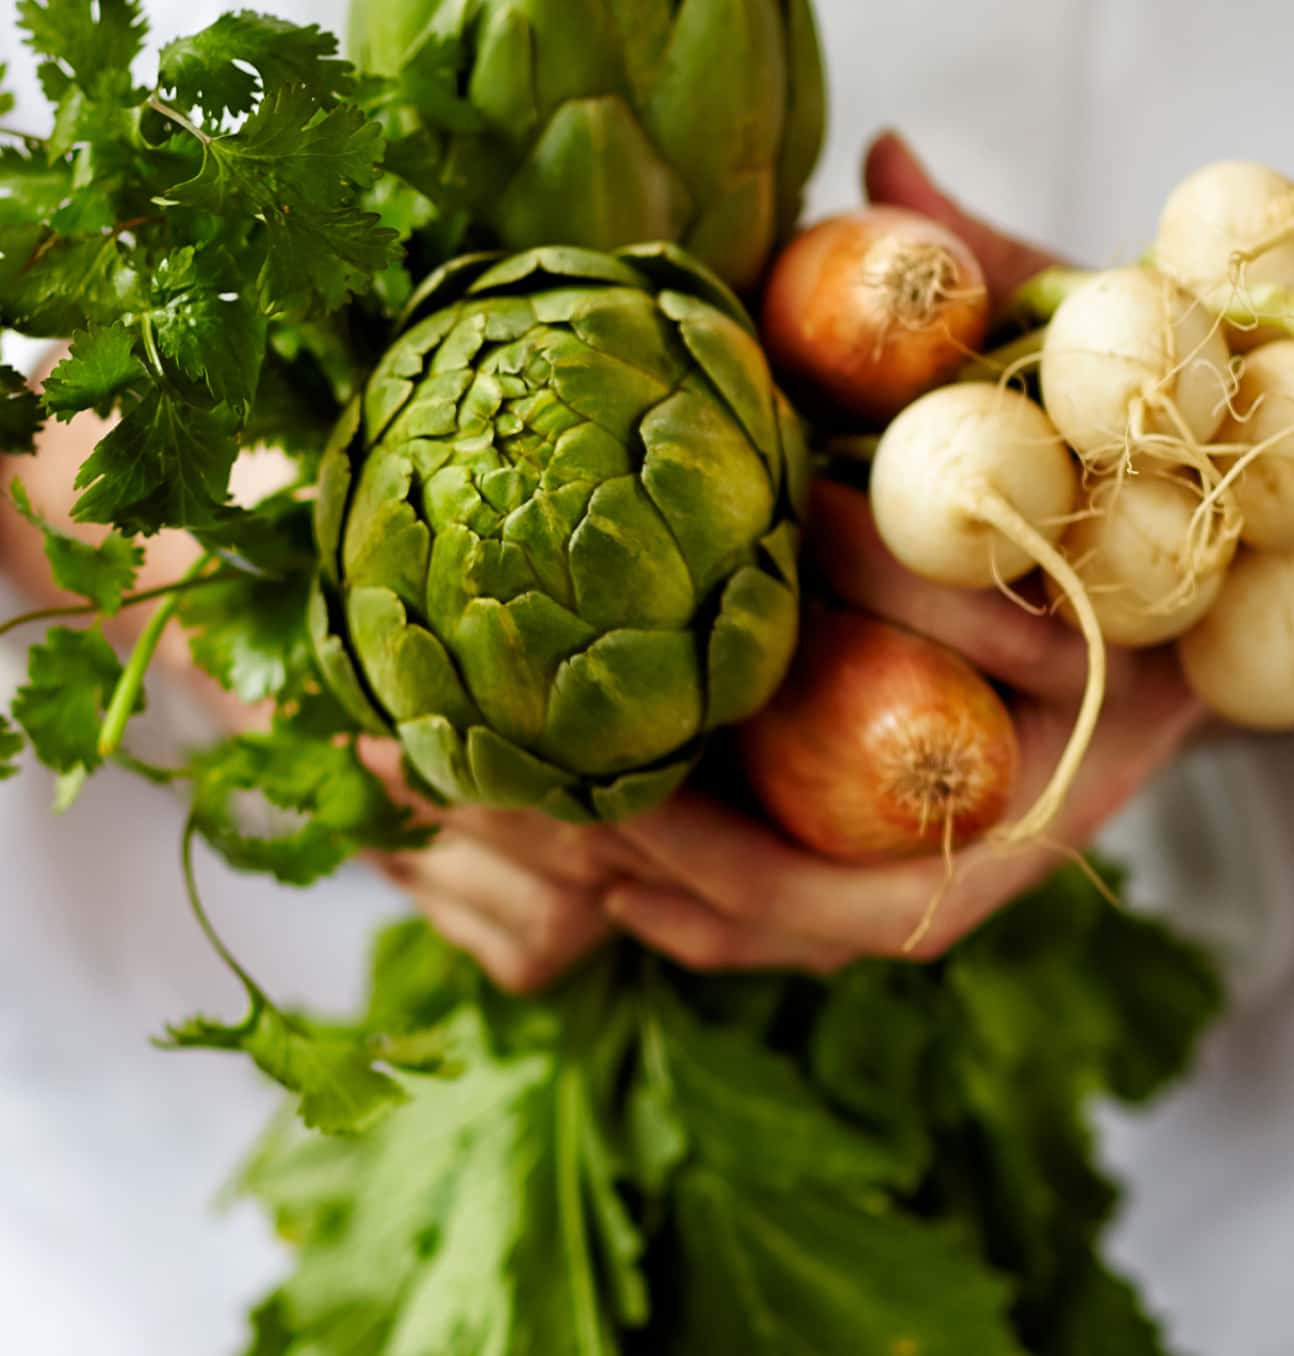 A close-up of fresh vegetables, including artichokes, onions, and herbs held in someone's hands, suggesting farm-to-table culinary freshness.